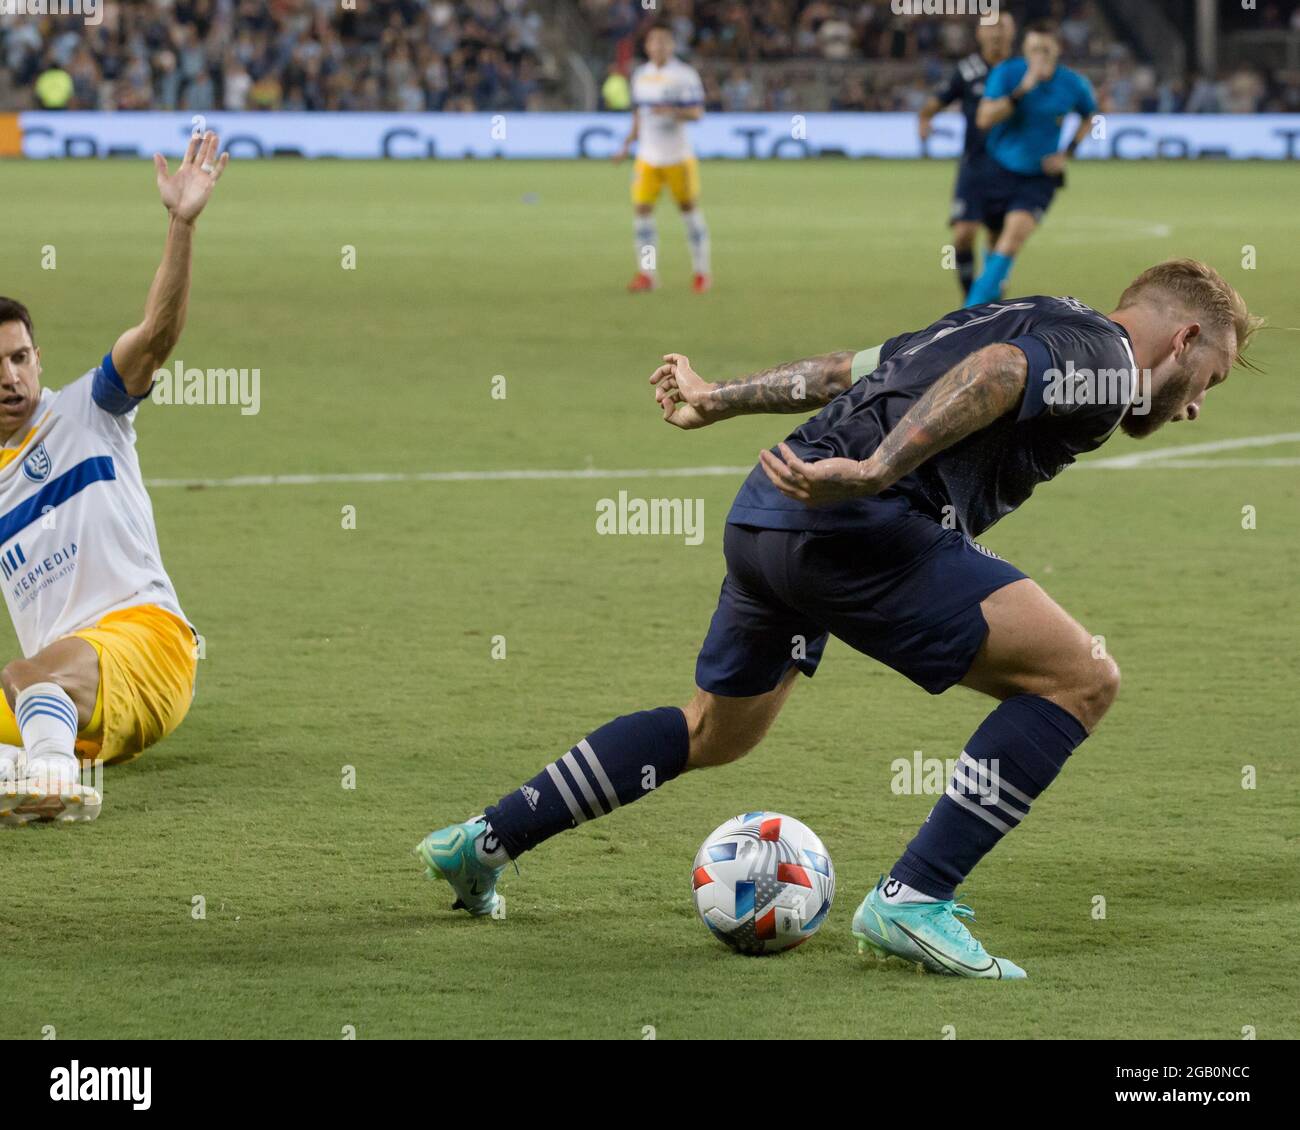 Soccerfoulreview Hi Res Stock Photography And Images Alamy